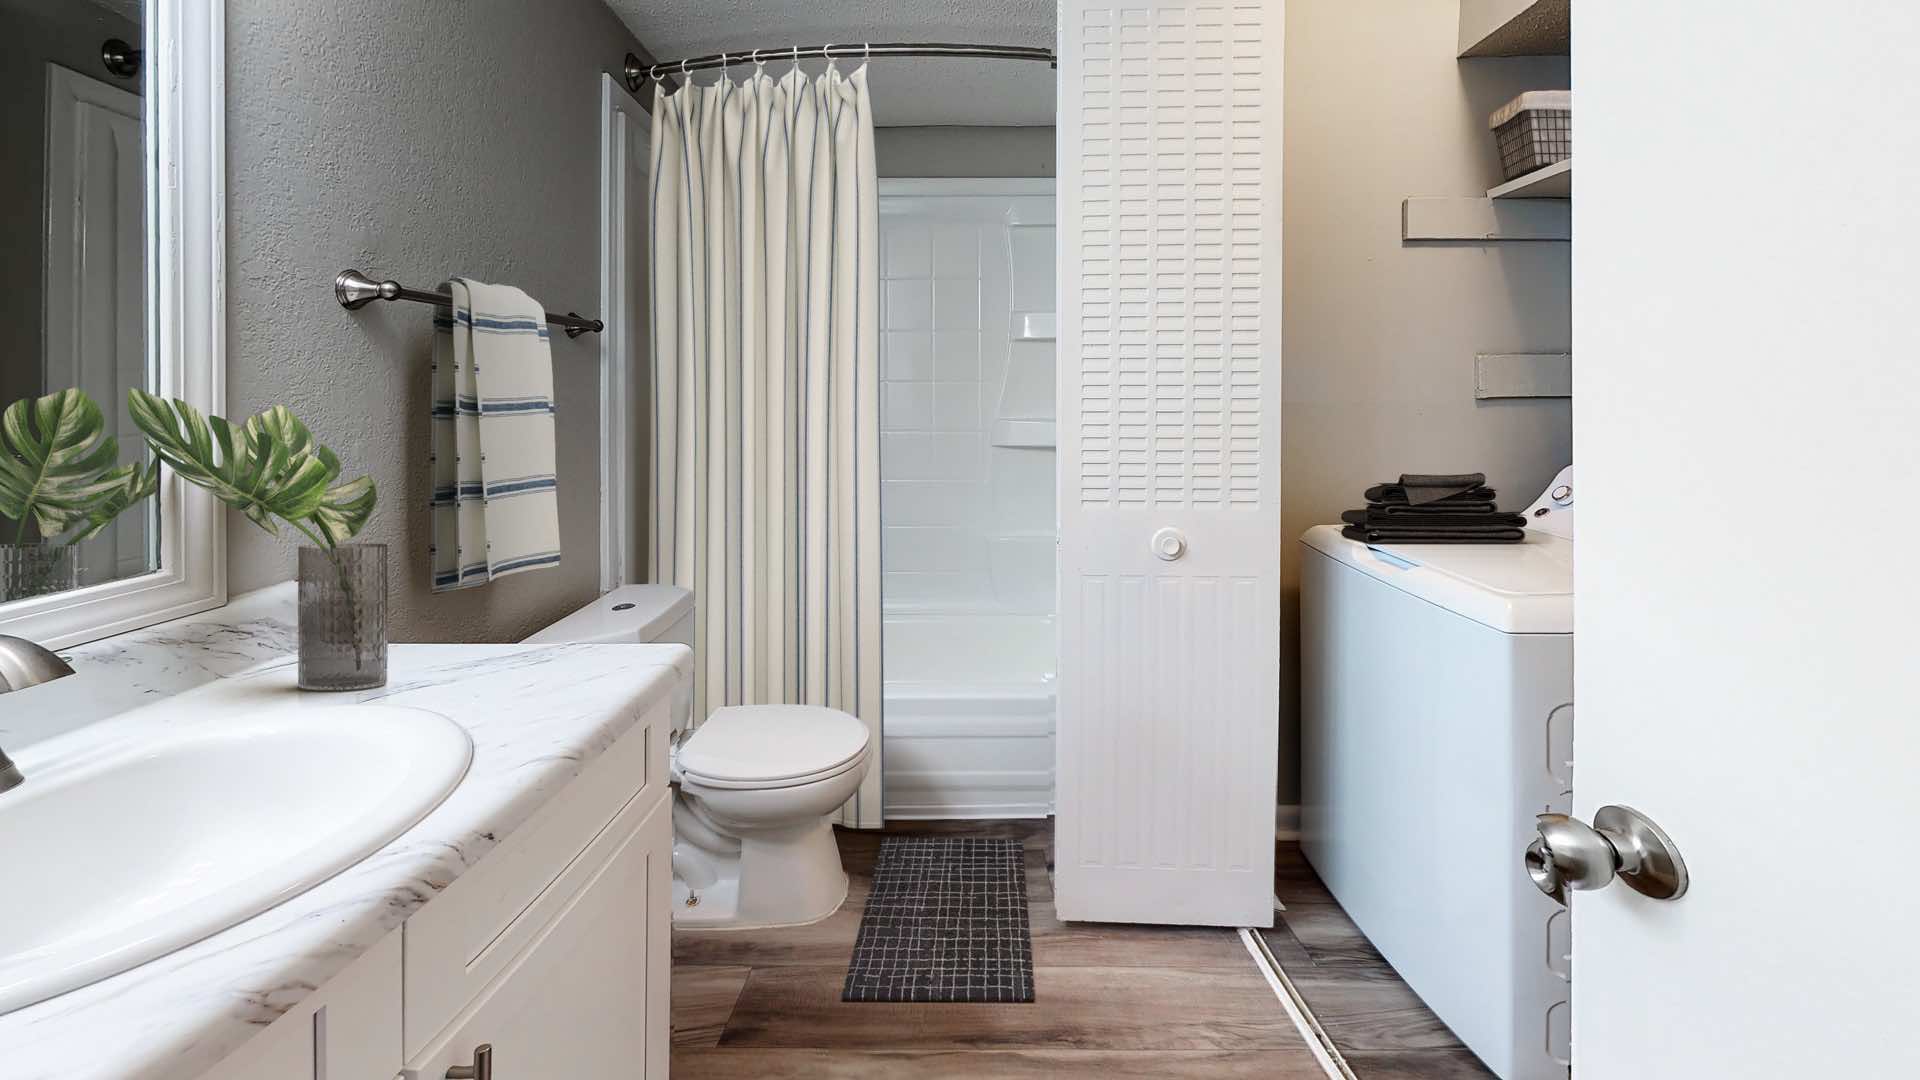 bathroom with convenient curved shower rod and washer/dryer unit in laundry closet